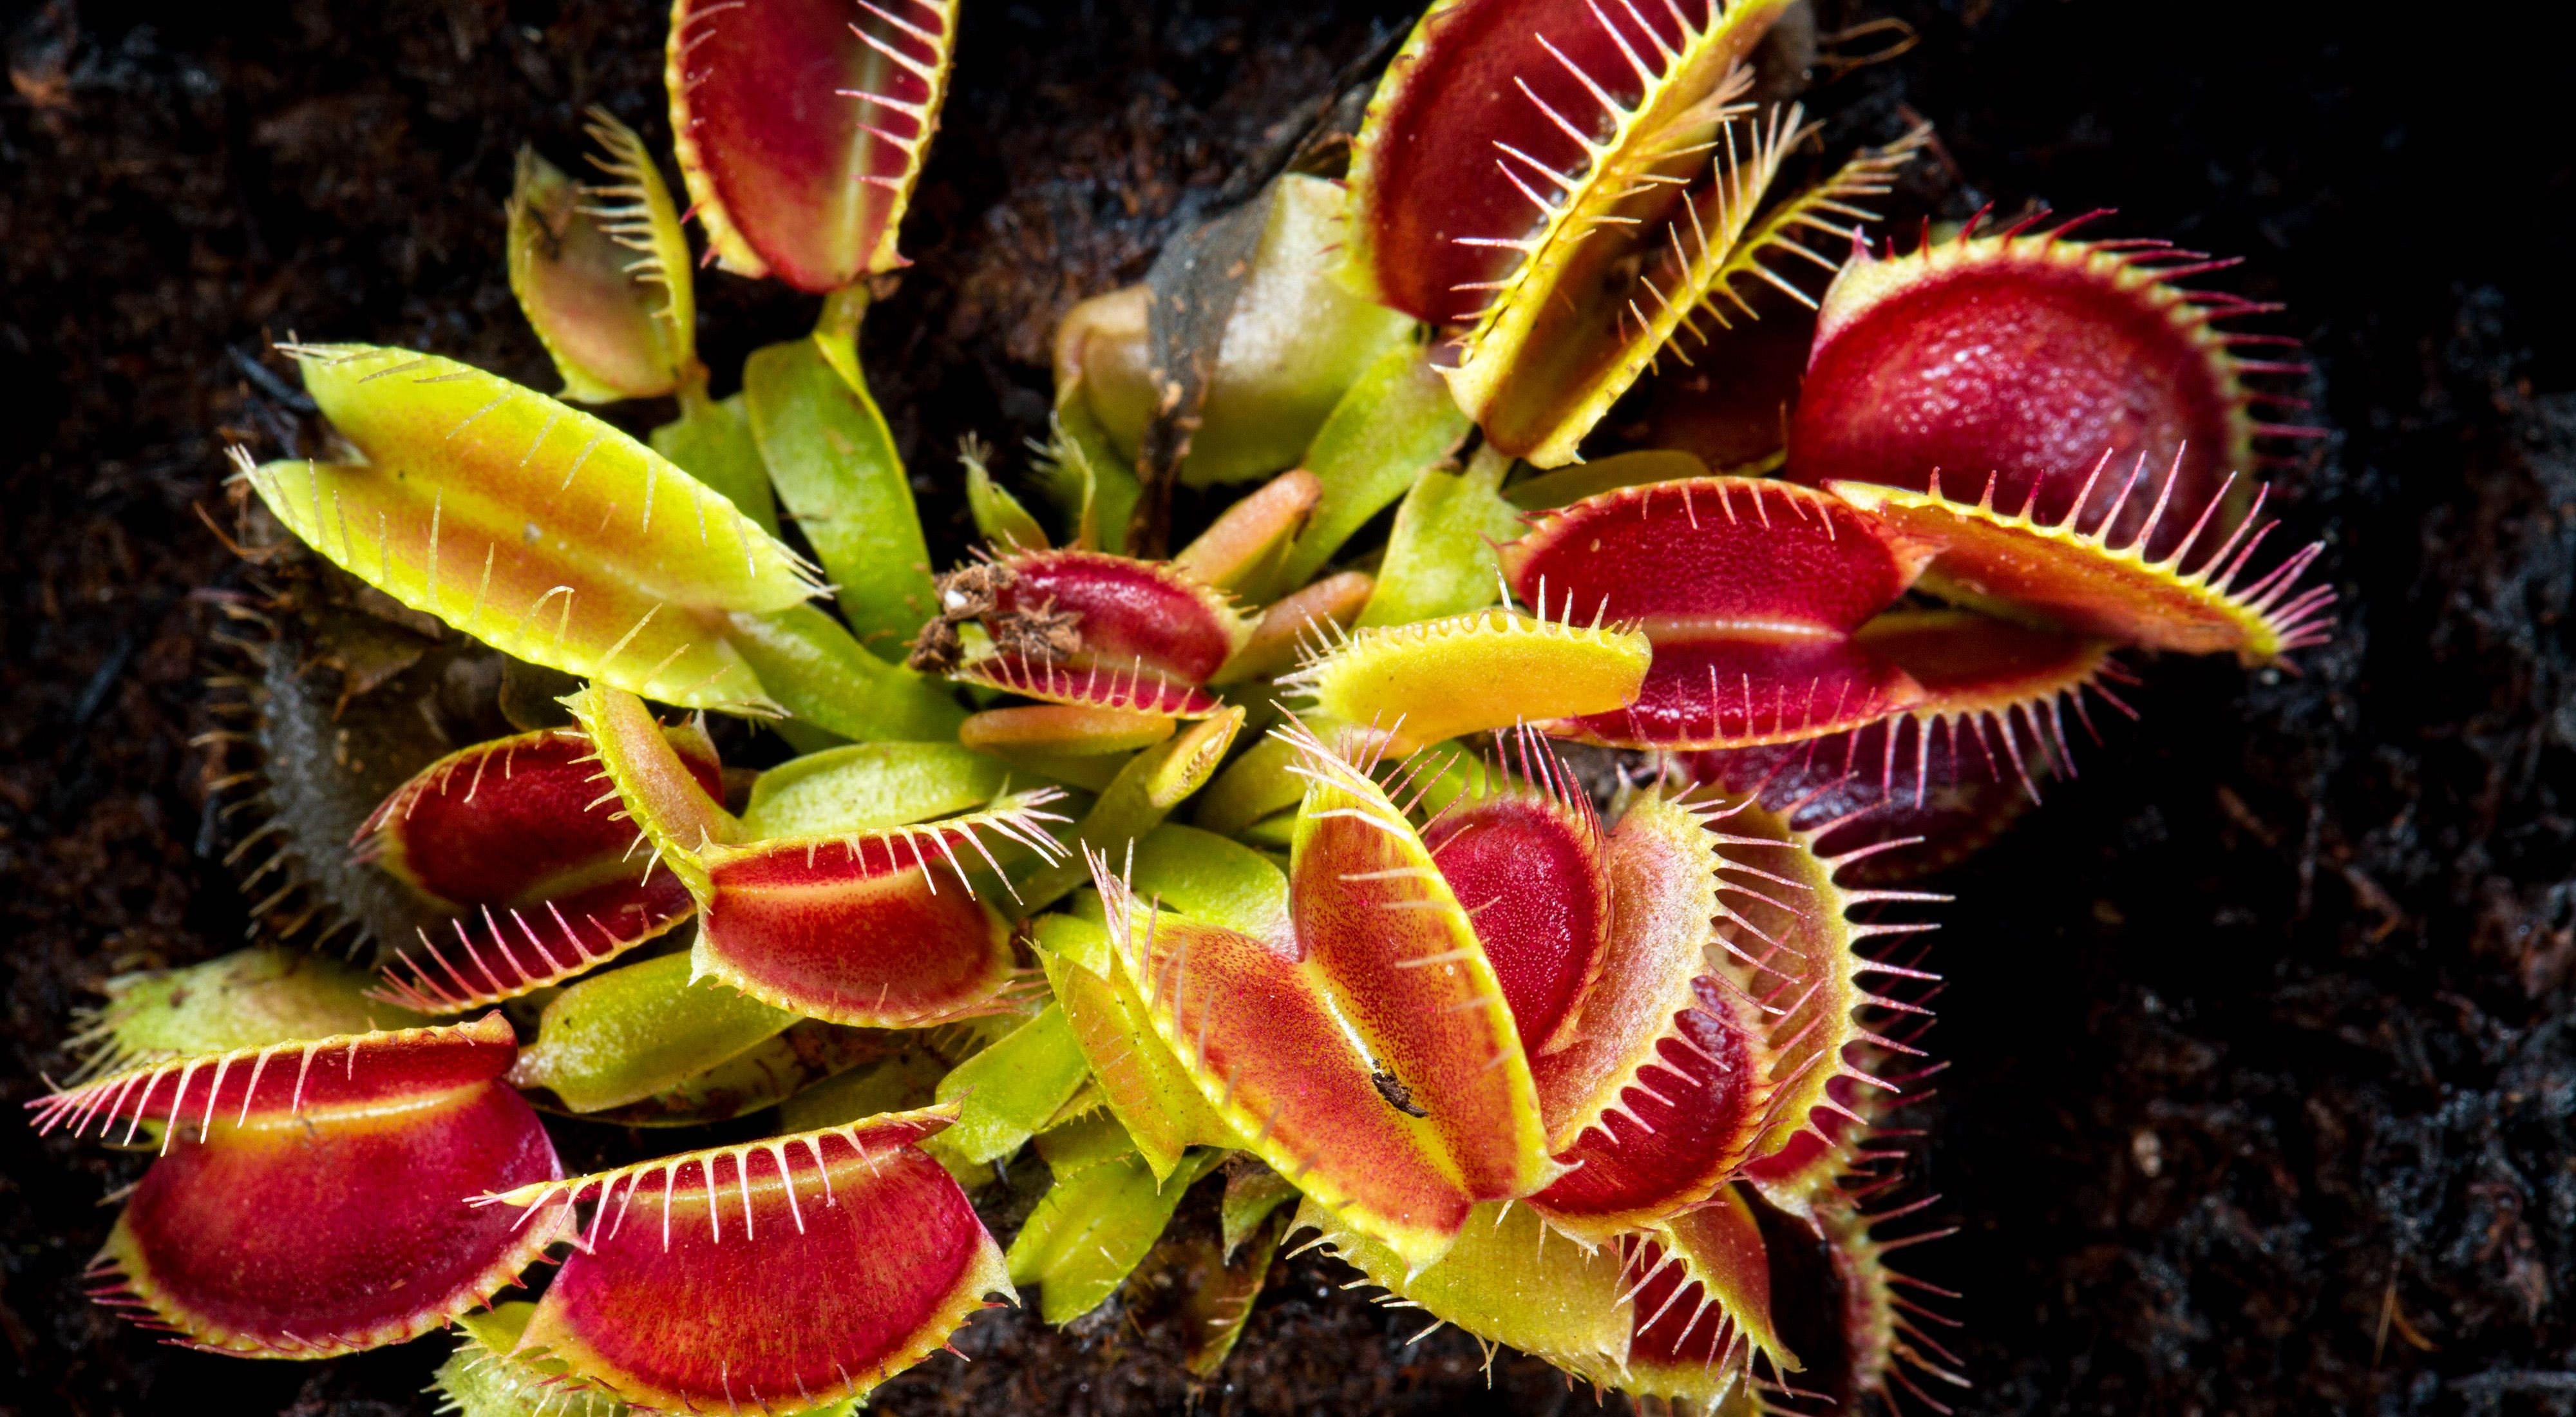 A blooming plant spreads "blooms" that resemble open mouths with teeth.